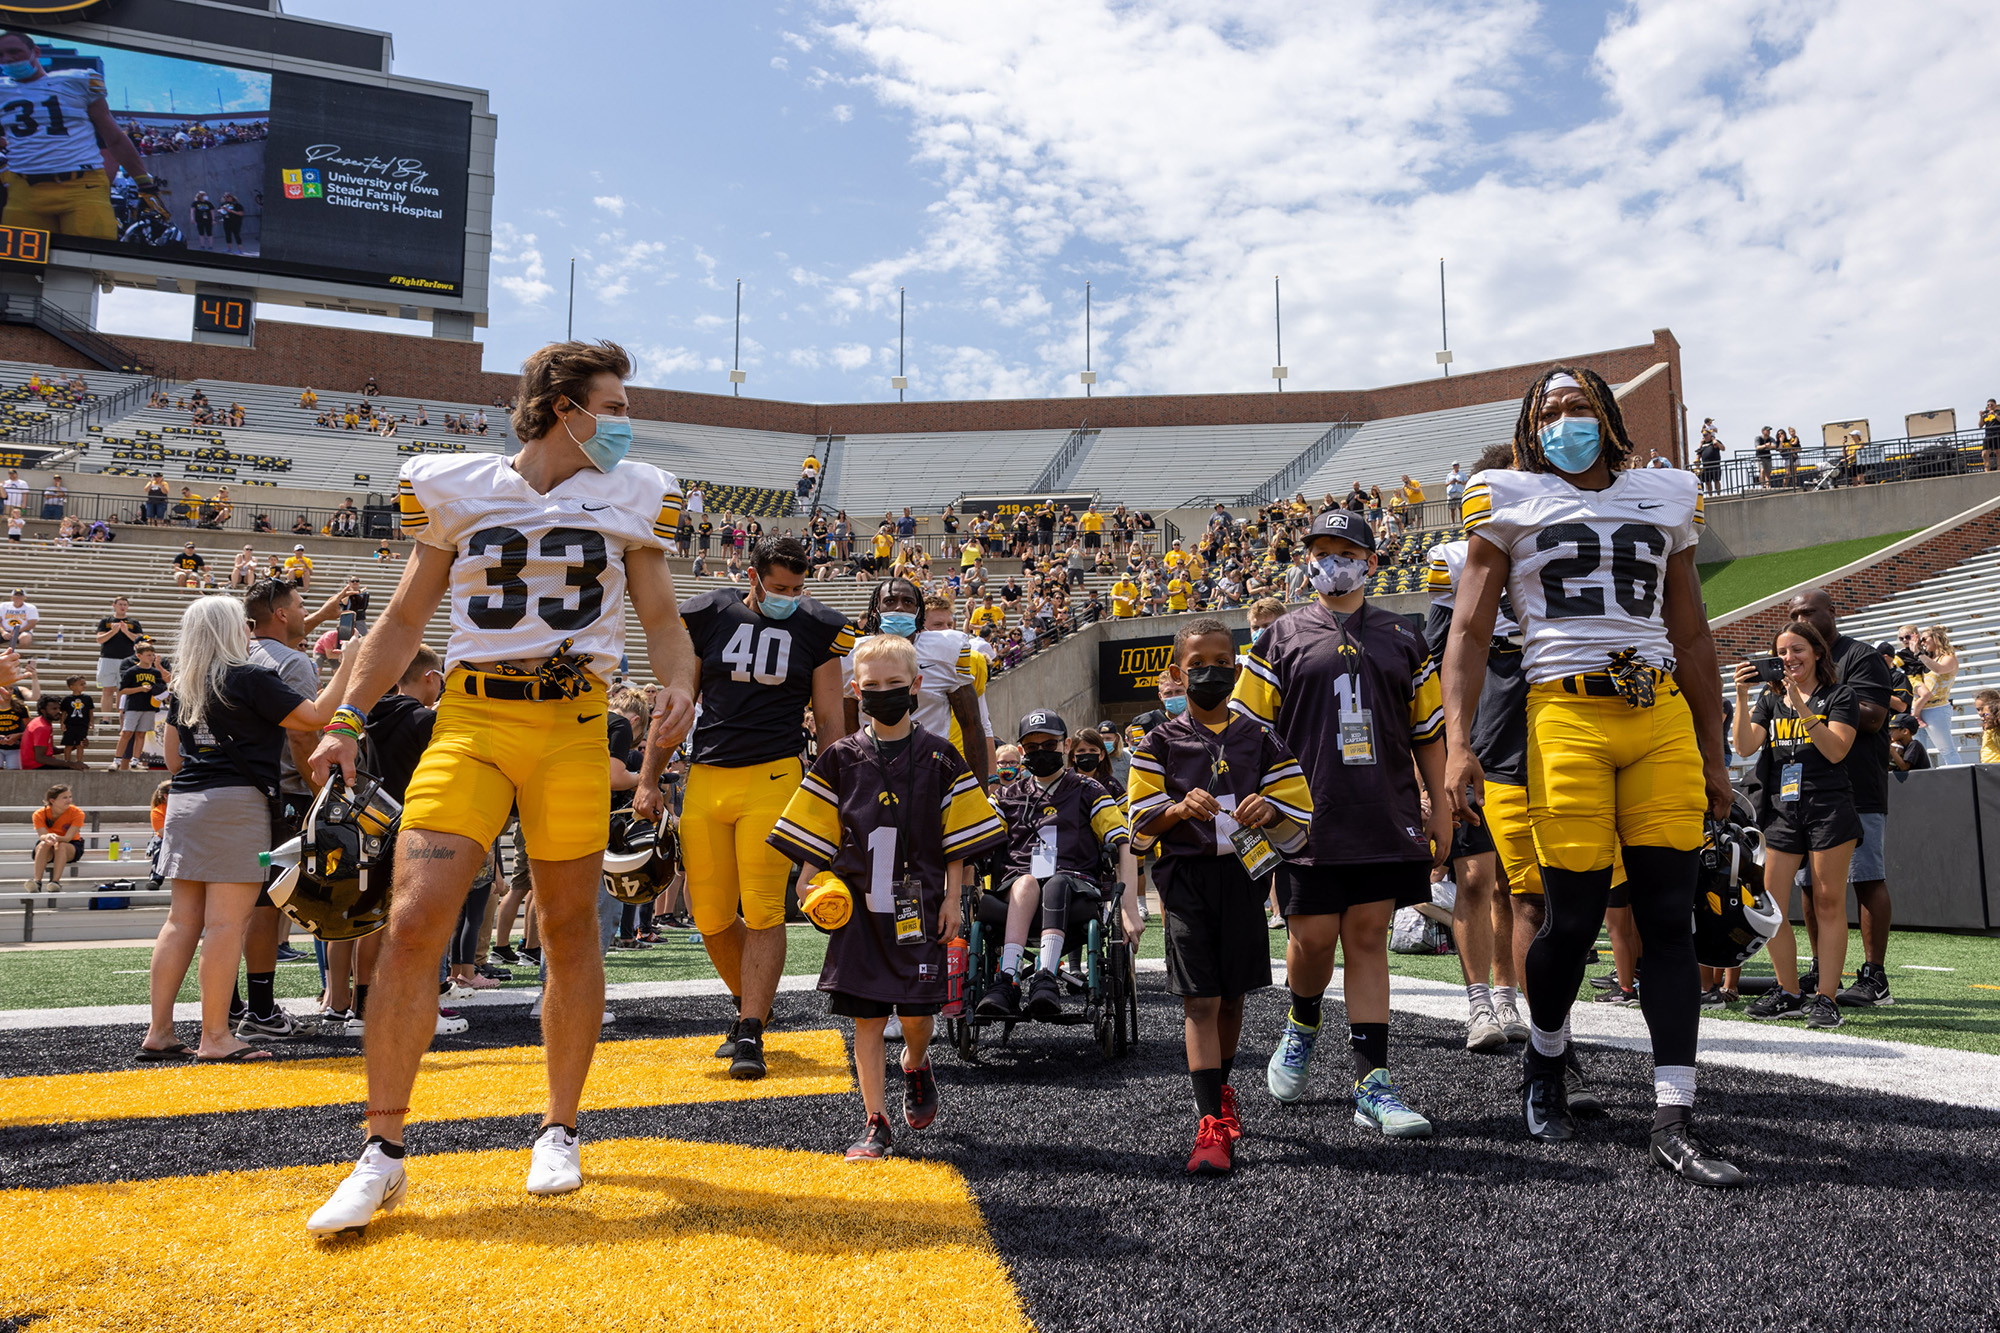 Kid Captains walking onto the field at Kinnick Stadium with Iowa football players